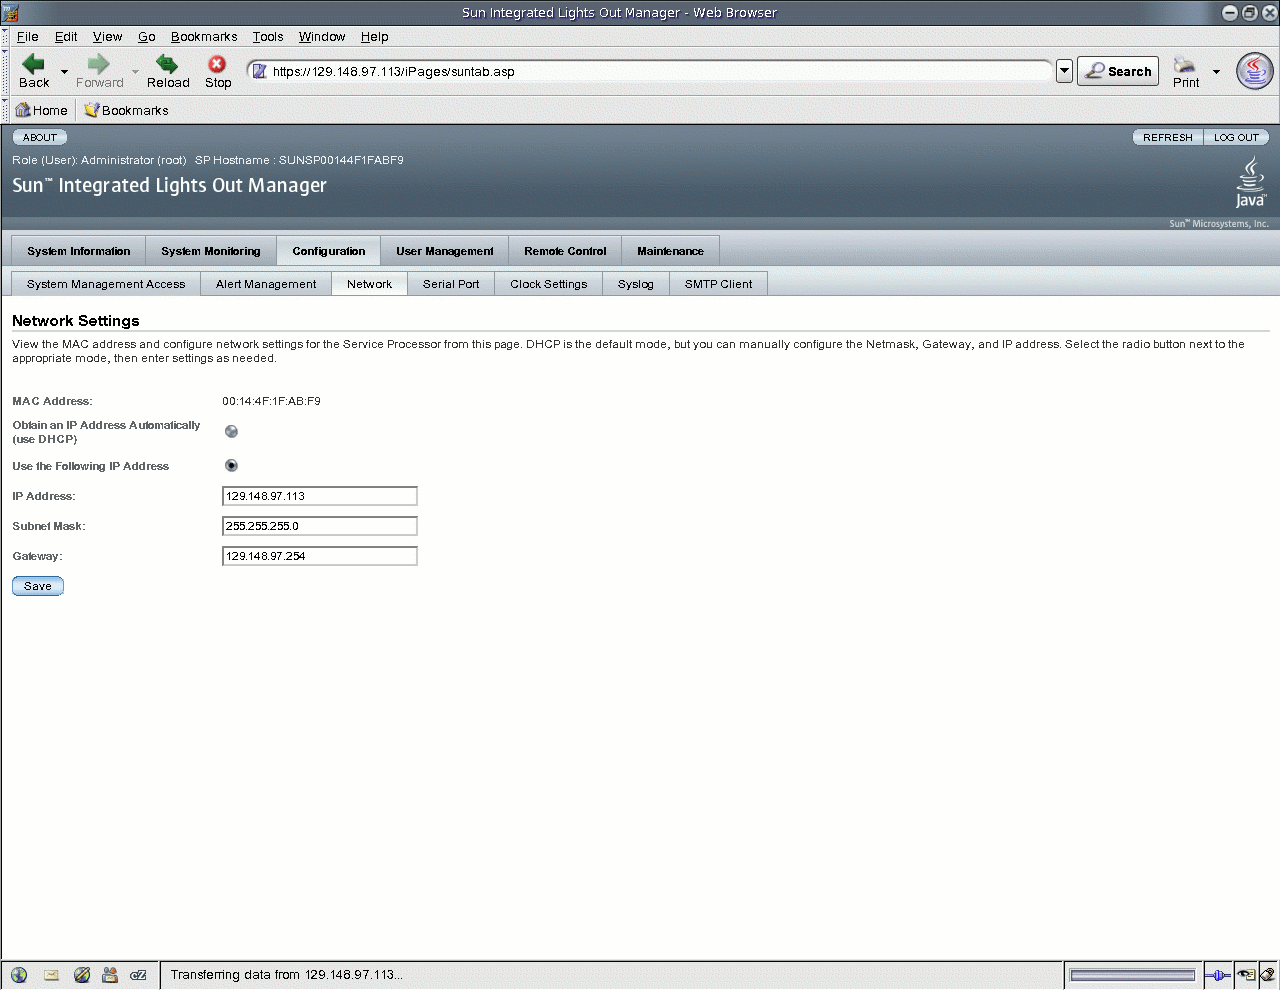 Graphic showing Network Settings page